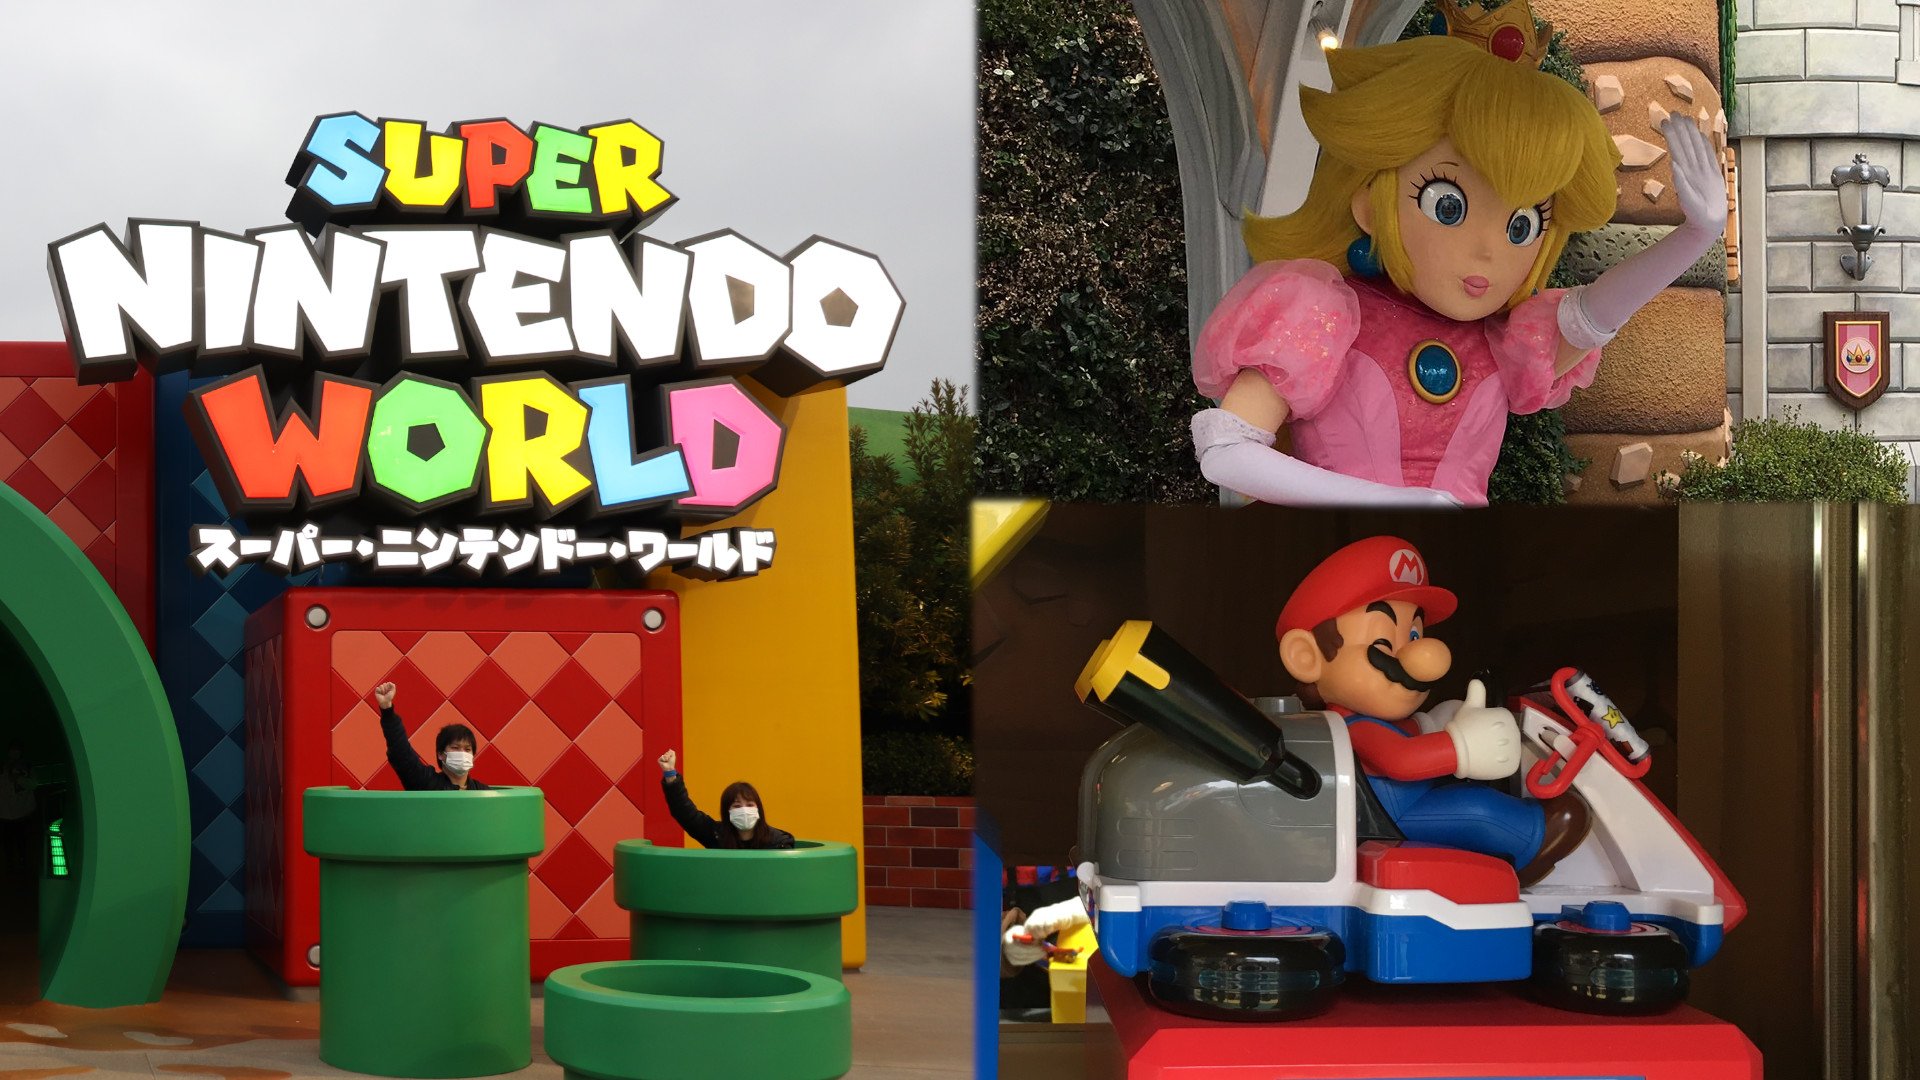 Let's remember Nintendo's official – and terrible – Mario PC games